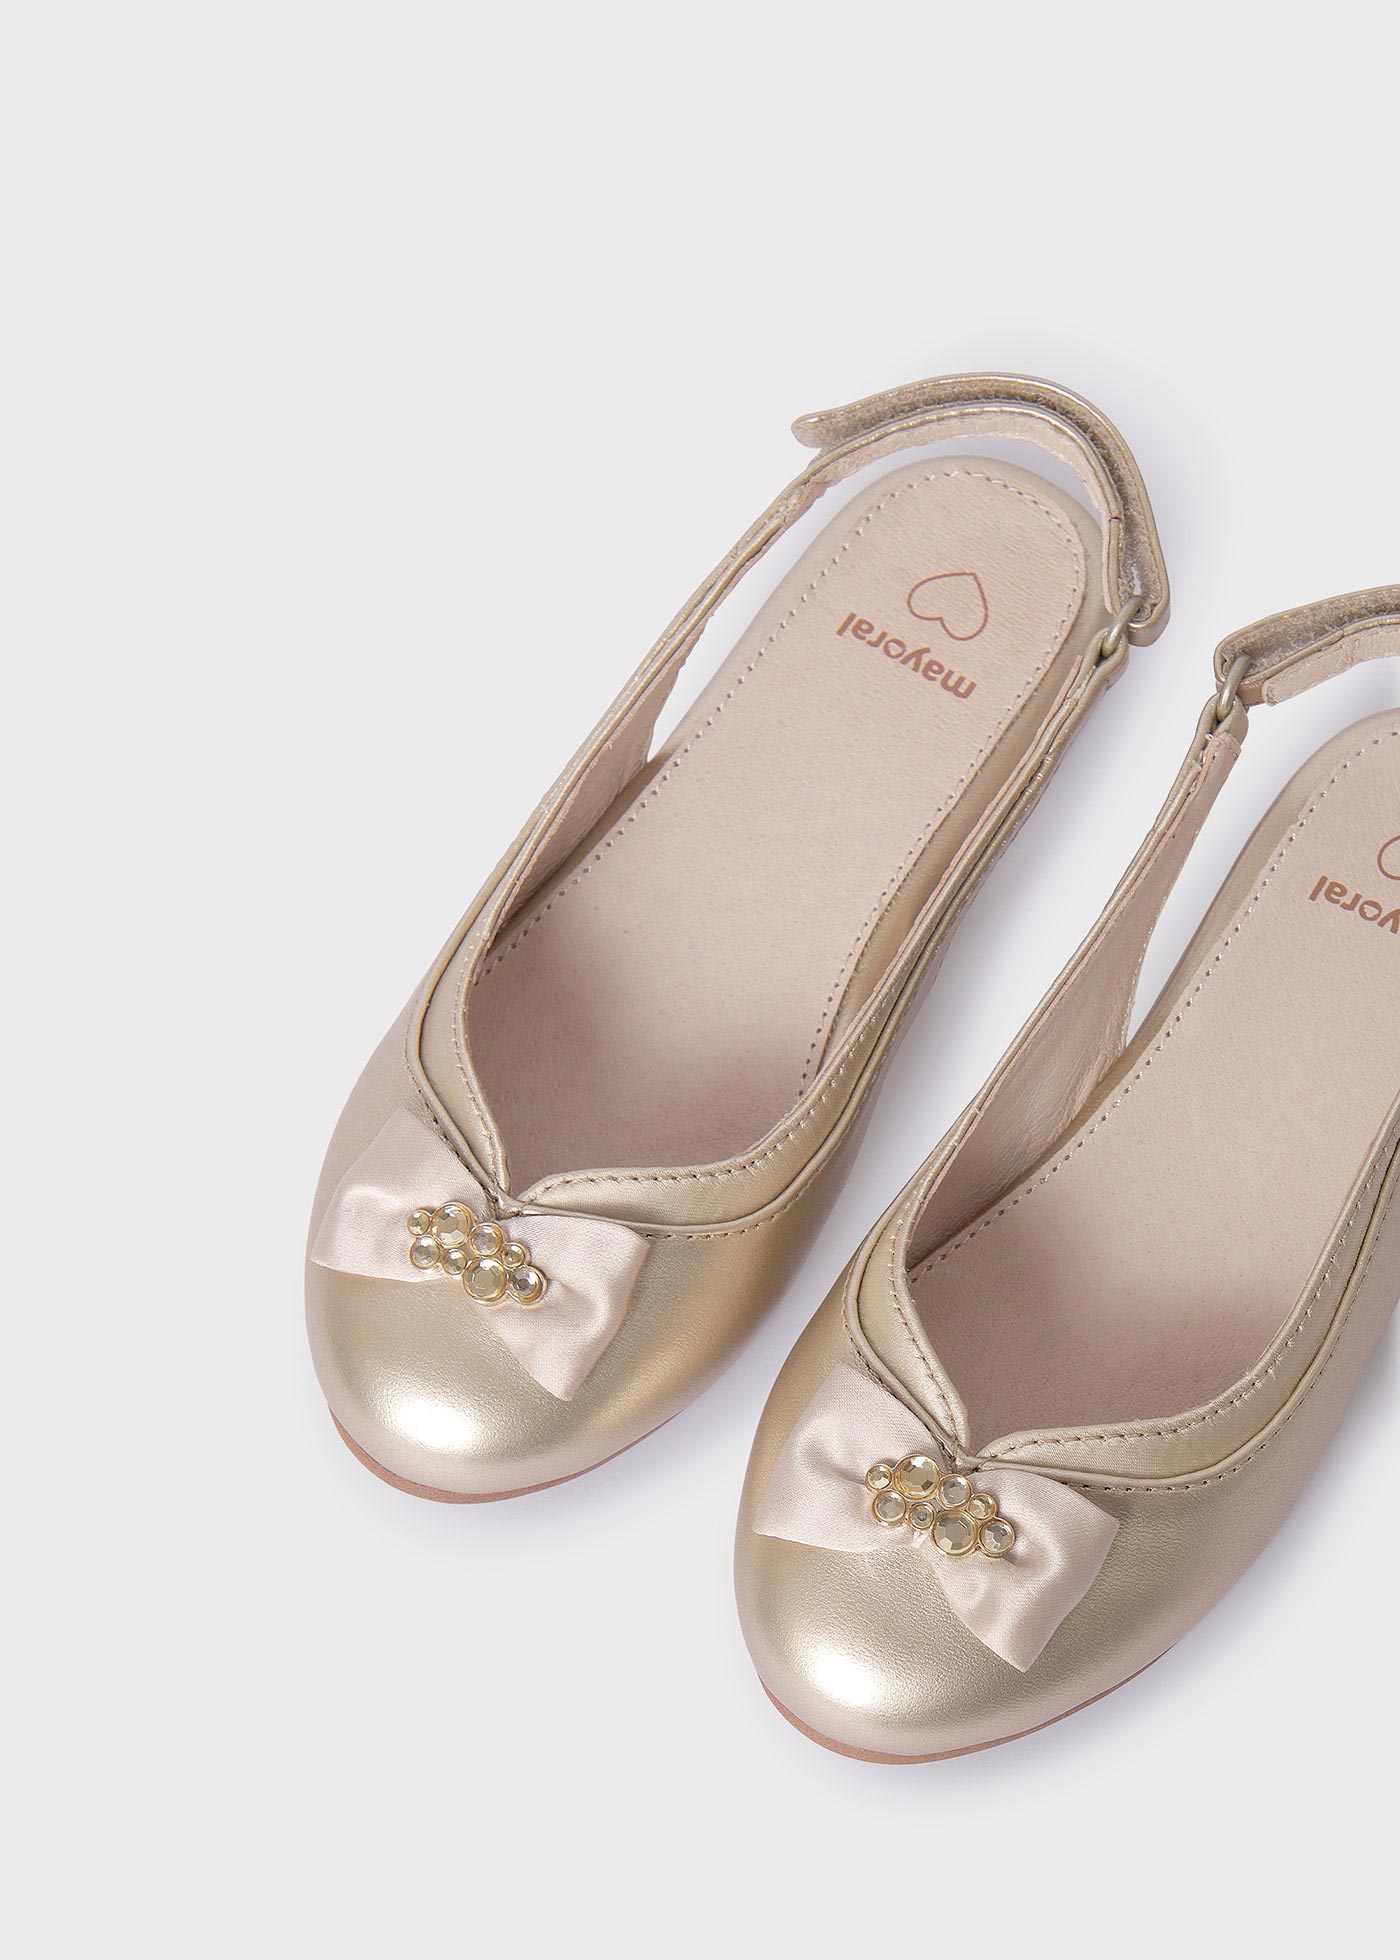 Girl Ballerina Flats with Bow Sustainable Leather